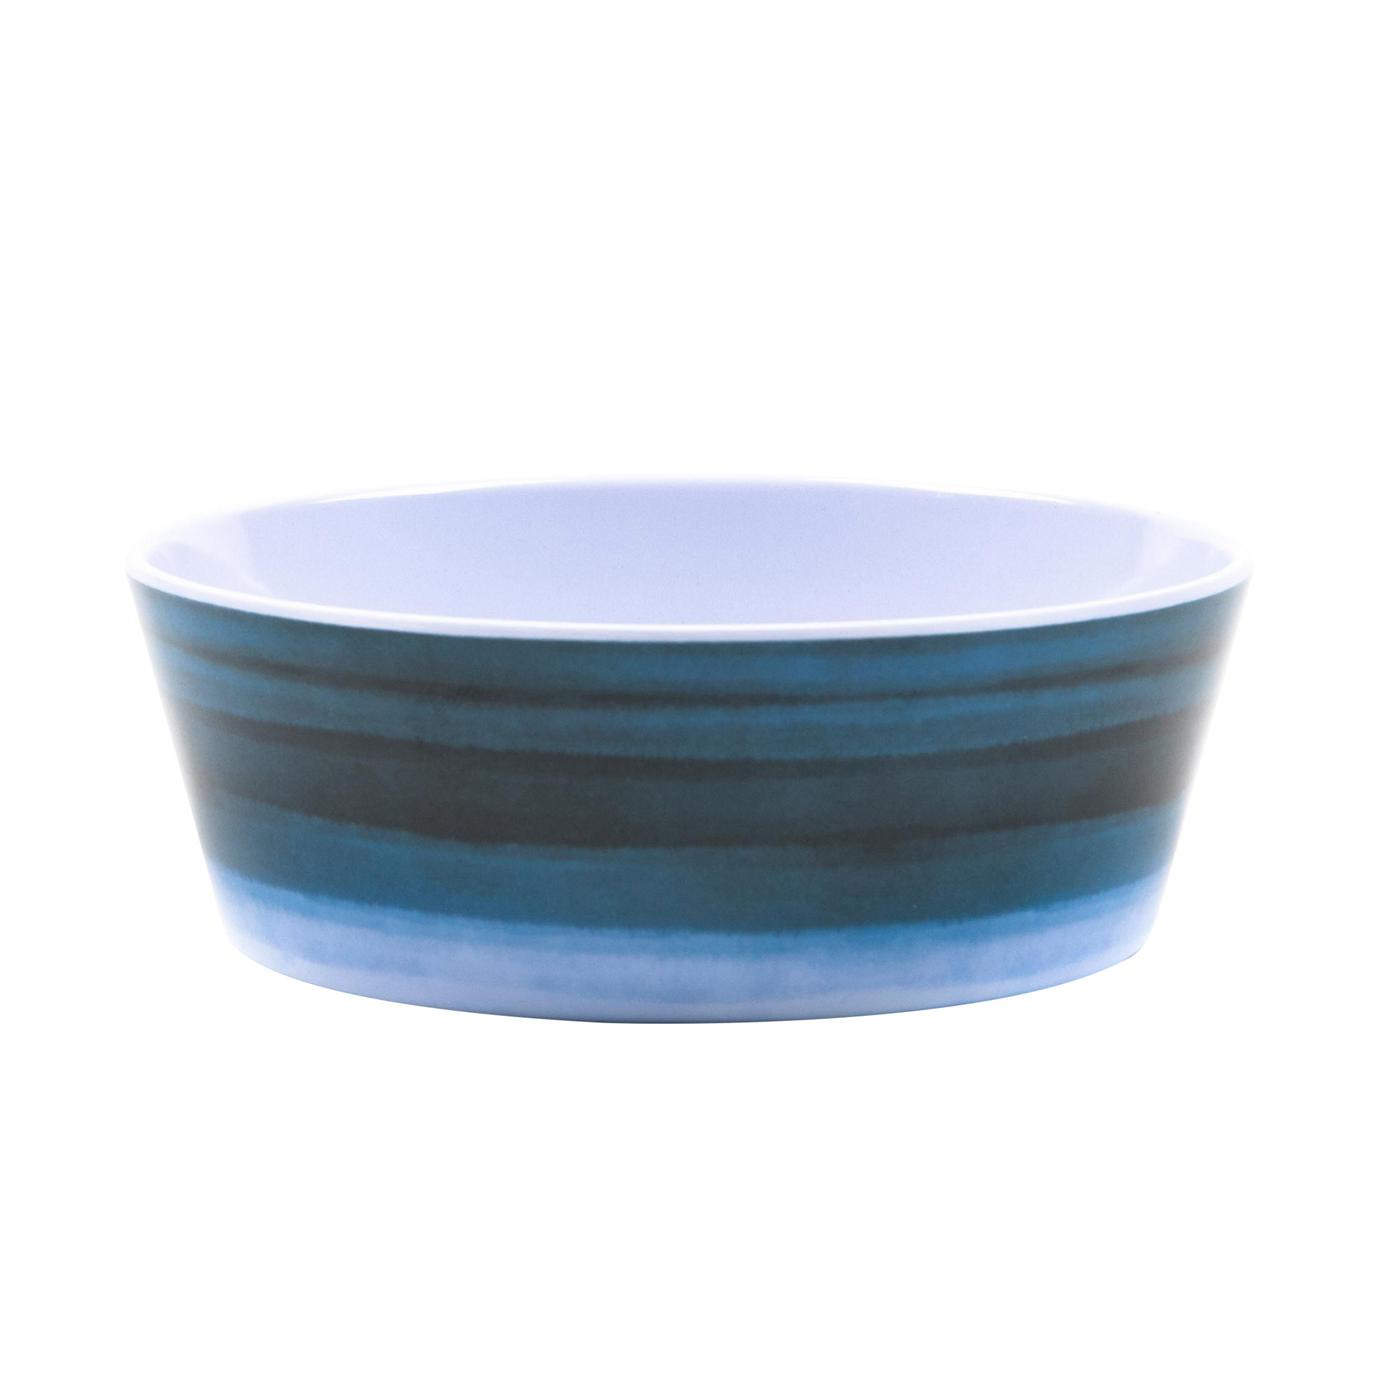 Woof & Whiskers 32 oz Melamine Pet Bowl - Blue Ombre; image 1 of 4